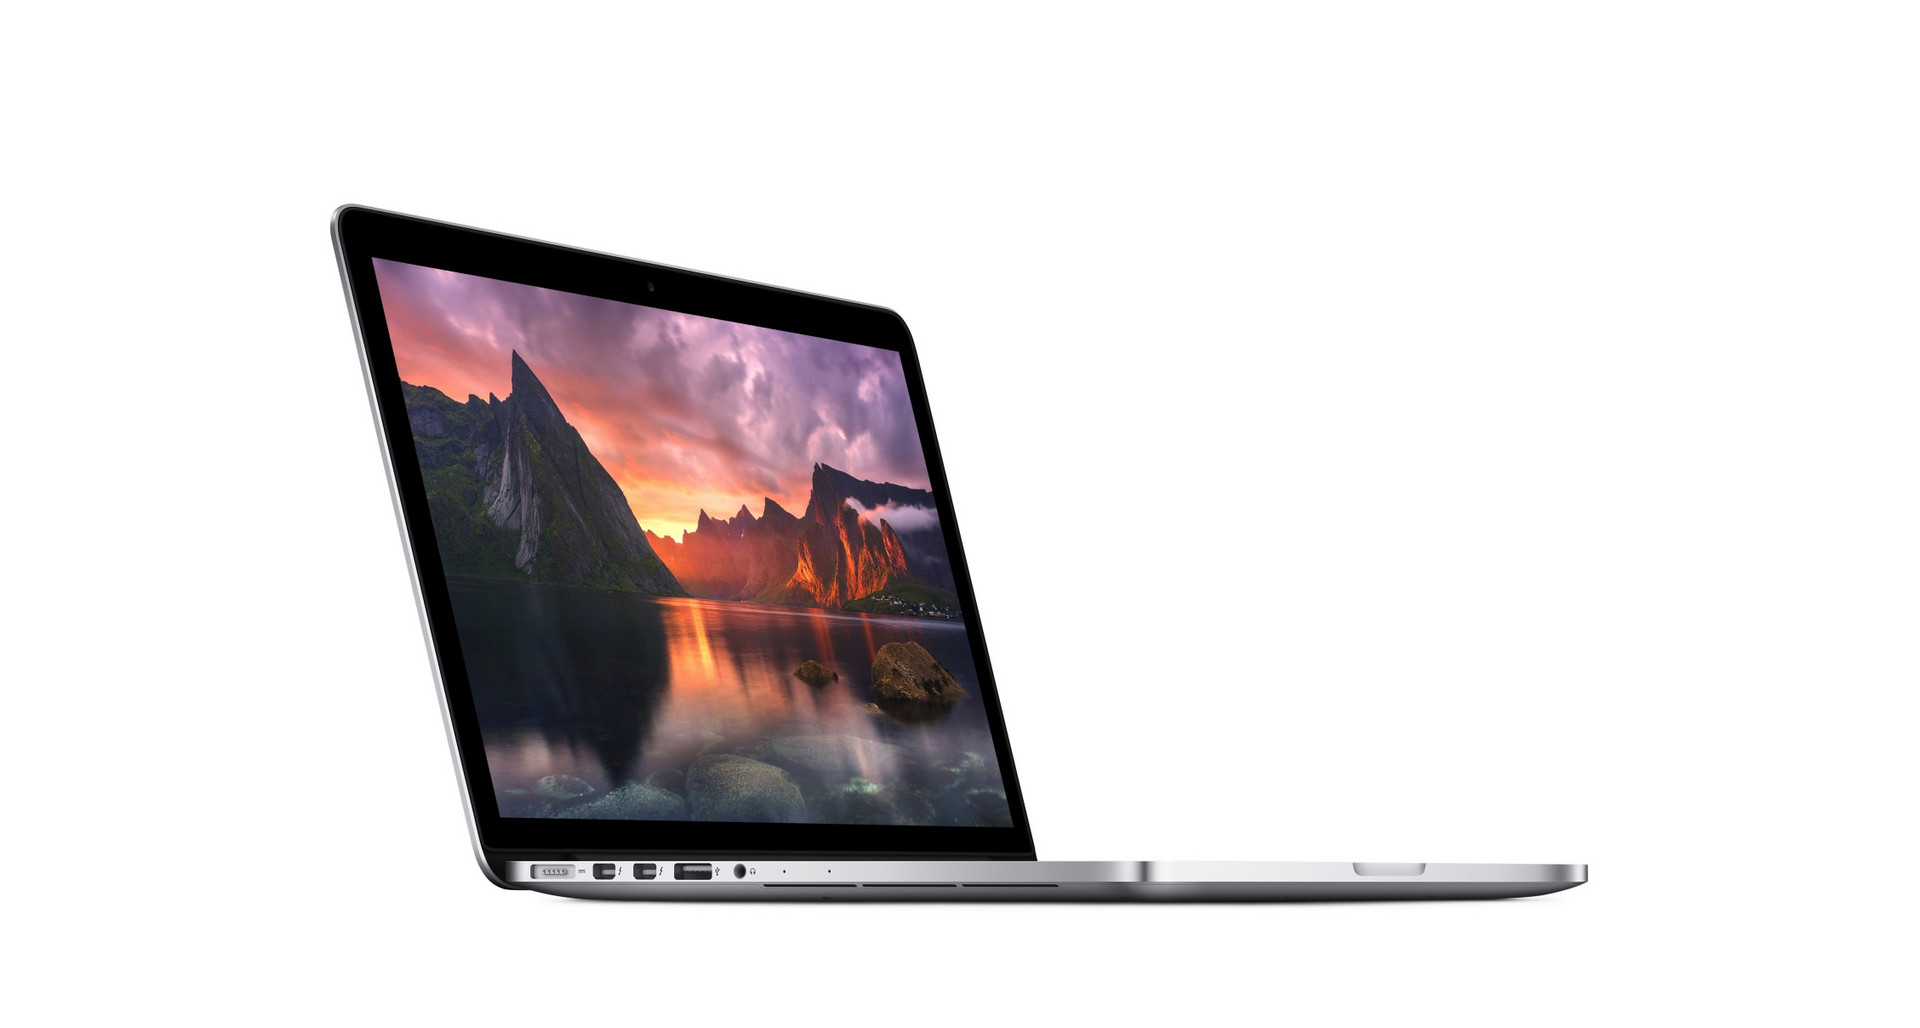 Get A Refurbished 2017 13.3-inch MacBook Air For Only $369.99